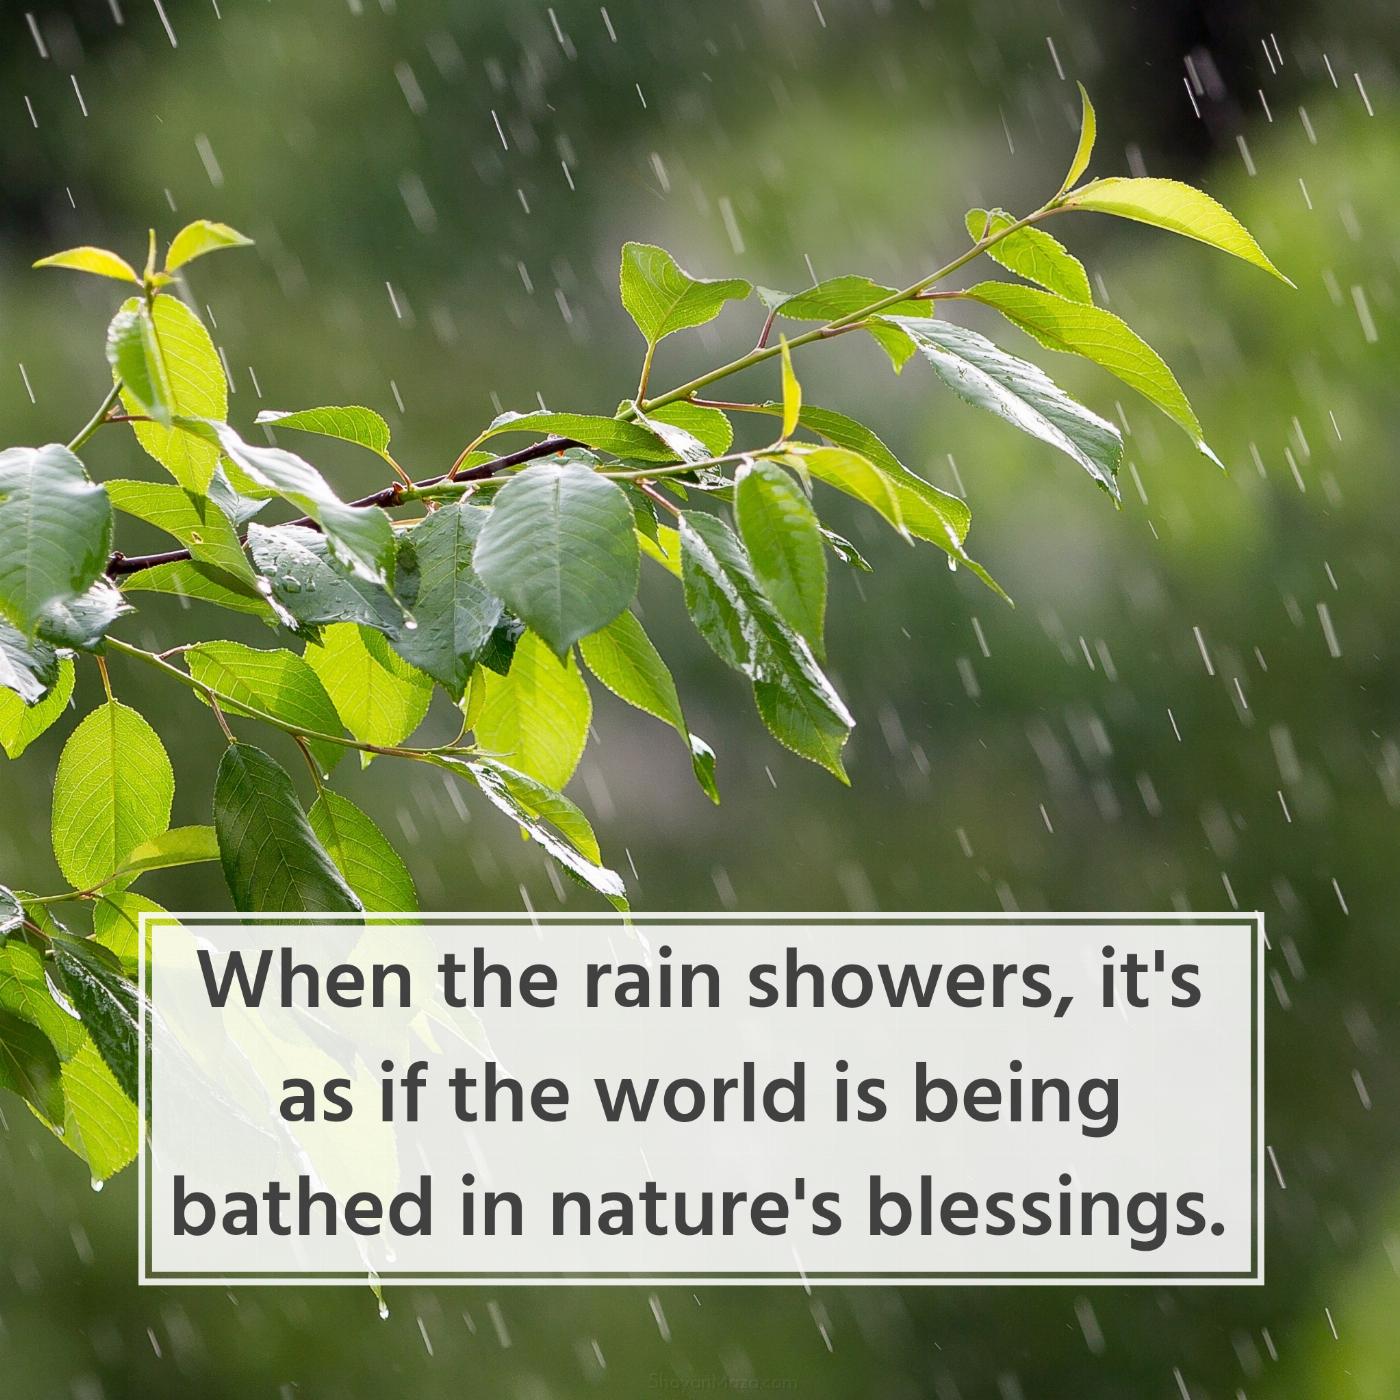 When the rain showers it's as if the world is being bathed